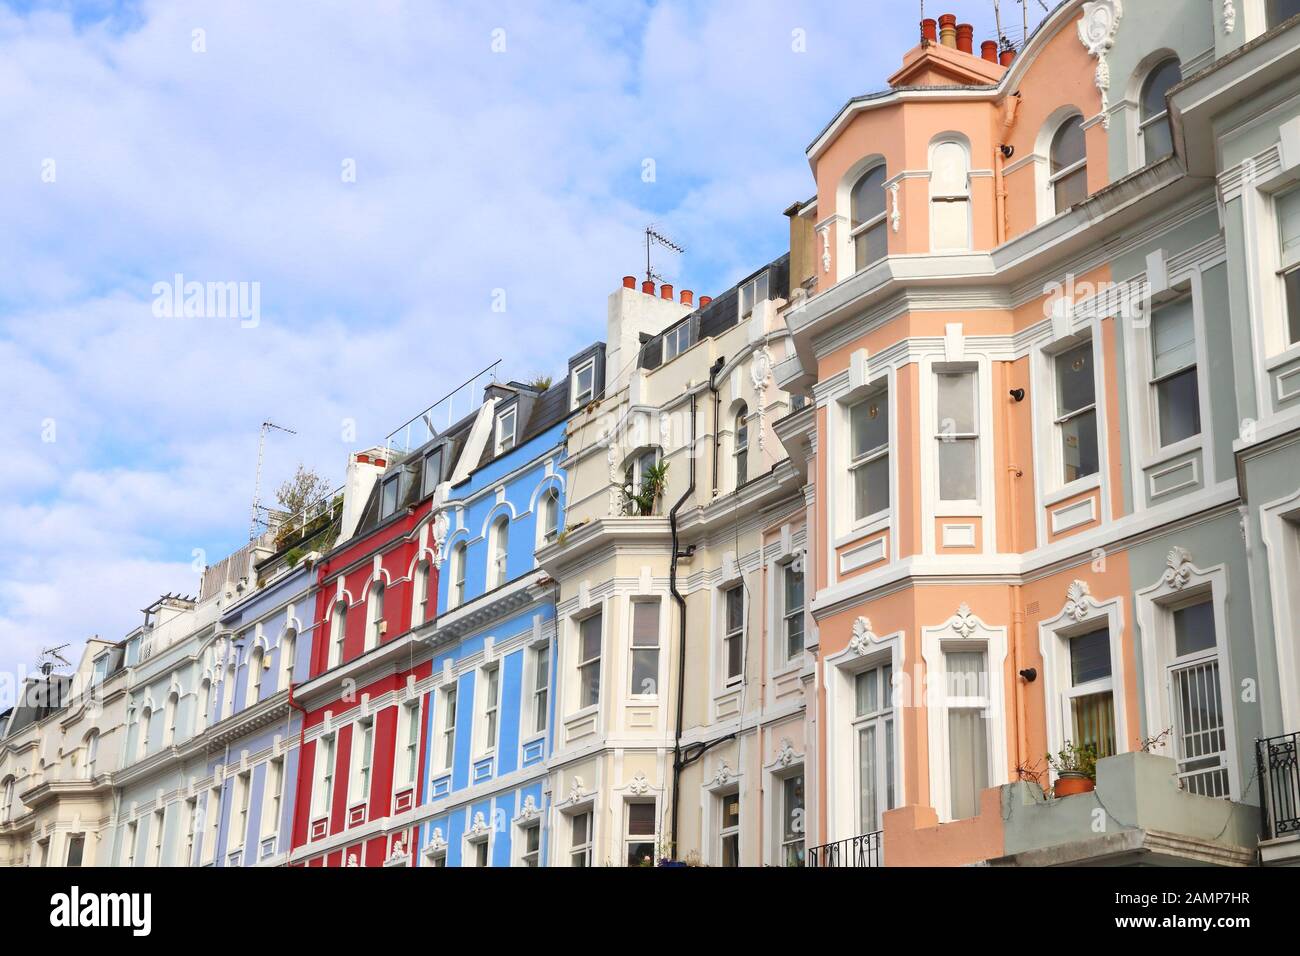 Notting Hill, London. Colorful residential neighborhood architecture. Stock Photo